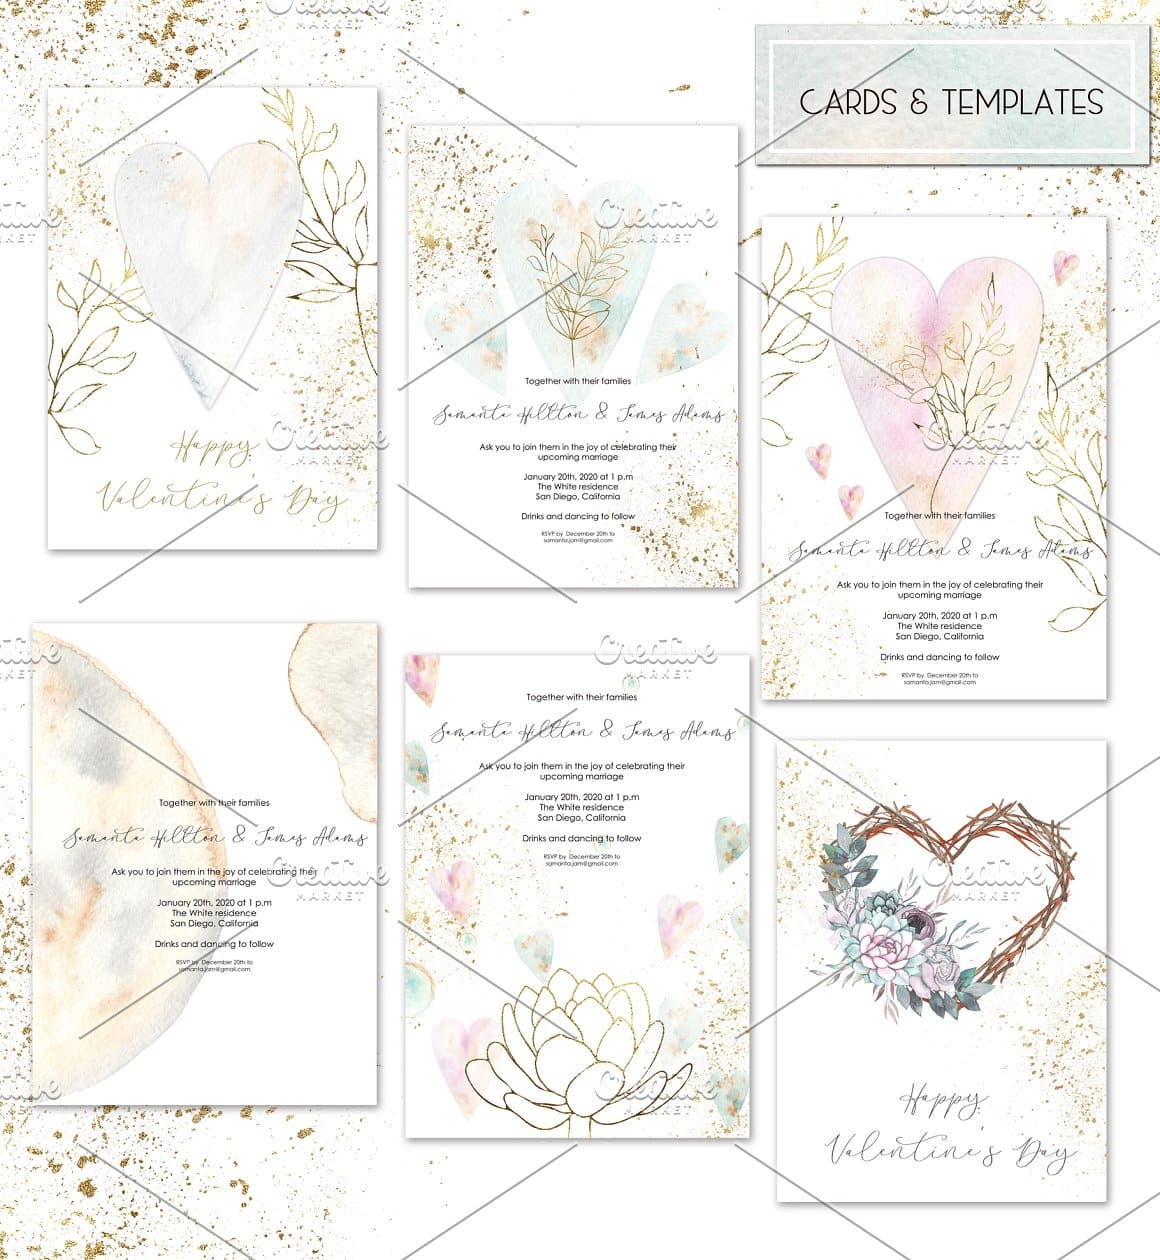 Cards and templates with images plants and love.